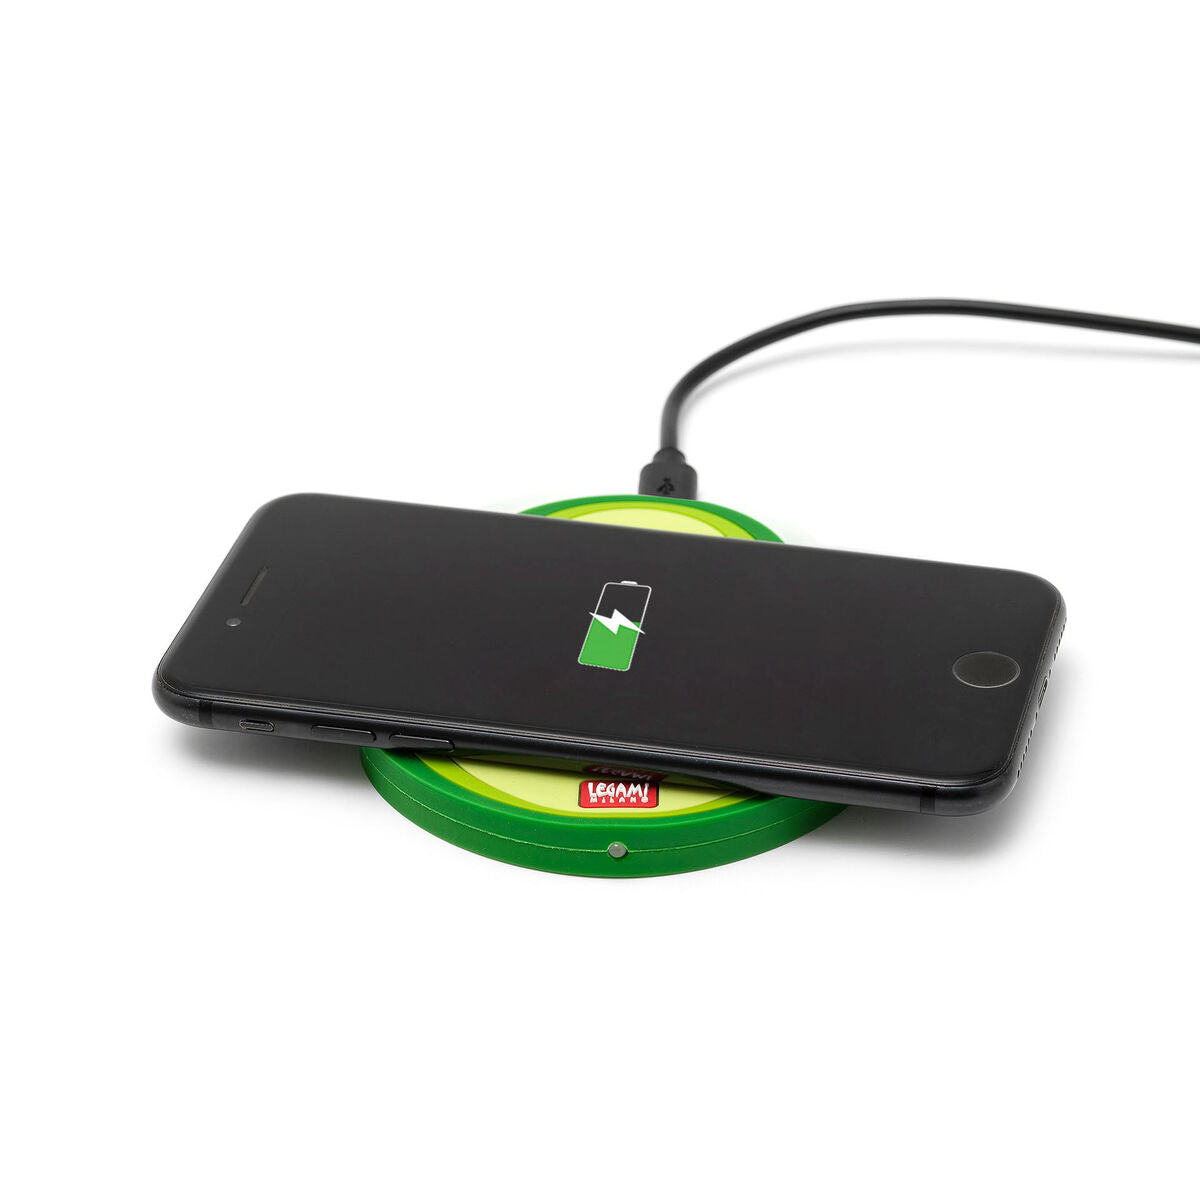 Tech | Legami Smartphone Wireless Charger Avocado Weirs of Baggot St